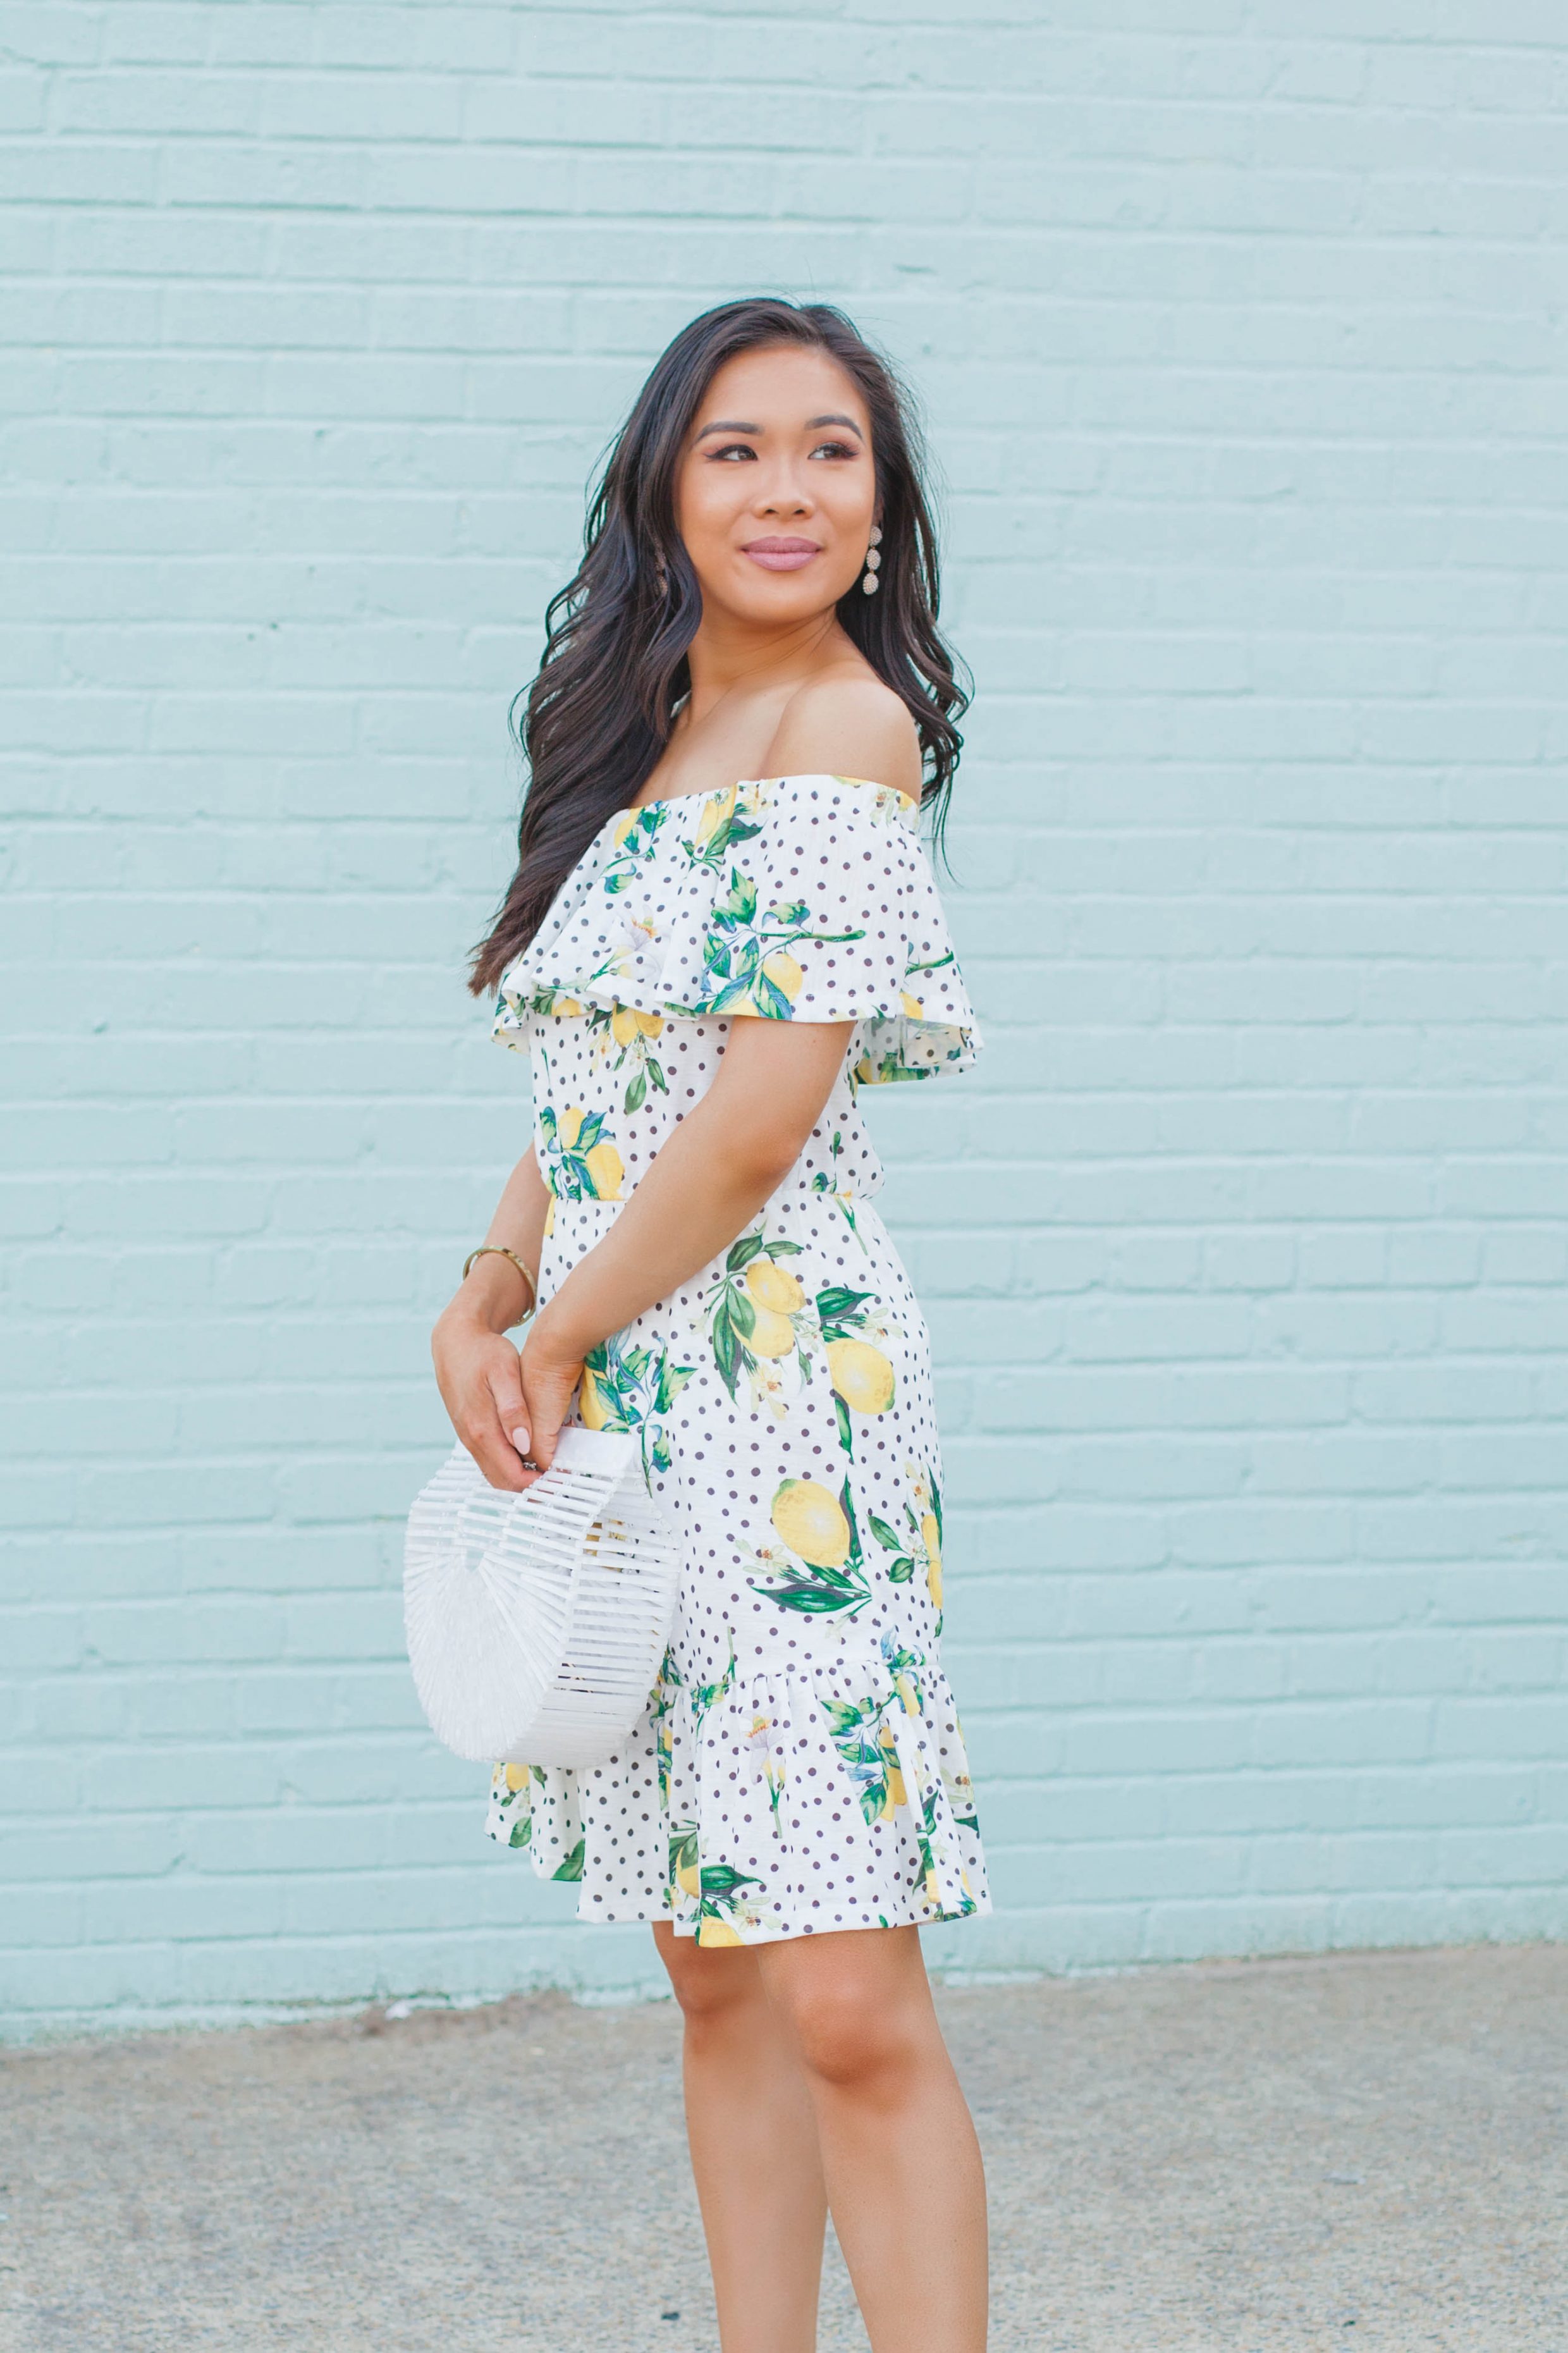 Off the shoulder lemon print dress with a white acrylic bag and Olive + Piper earrings for summer